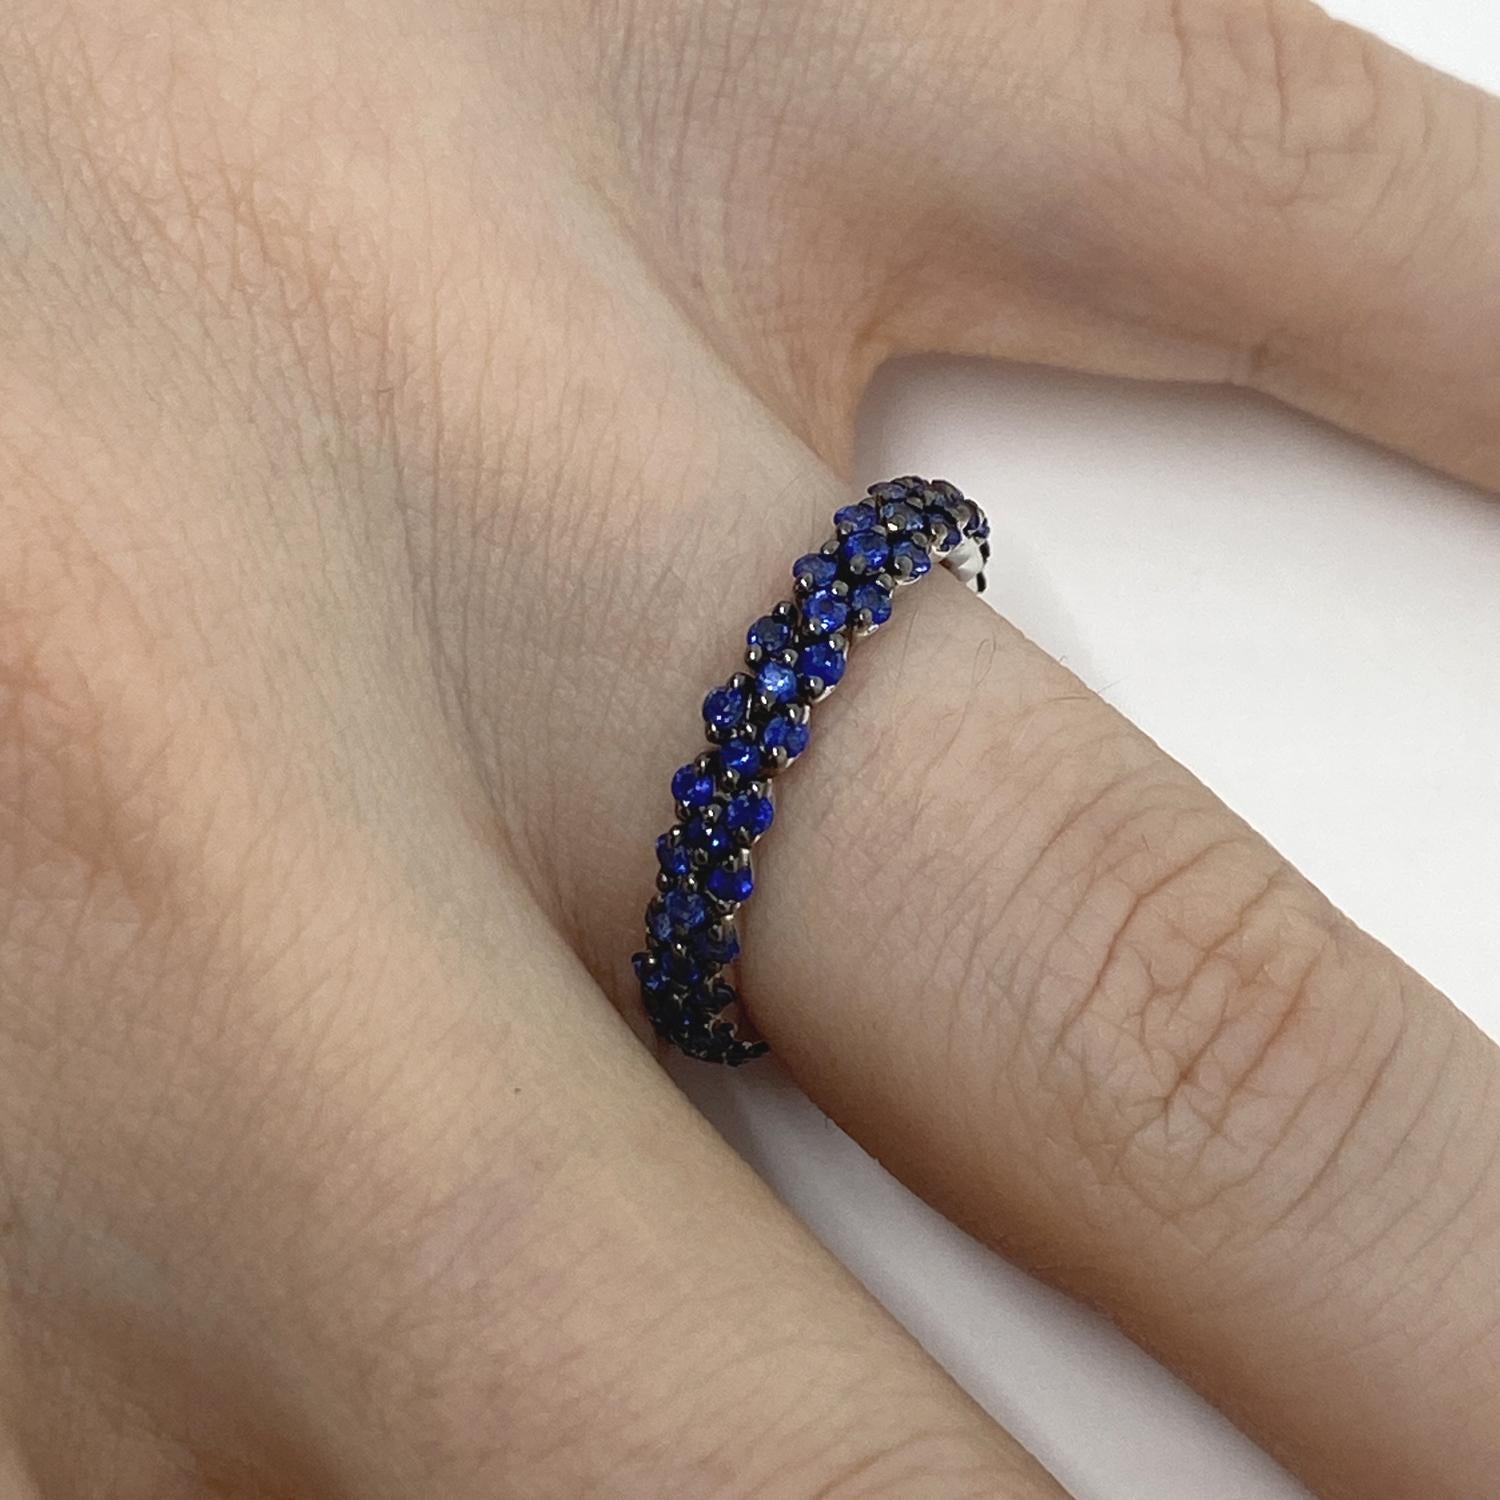 All-round ring made of 18kt white gold with brilliant-cut blue sapphires for ct.1.29

Welcome to our jewelry collection, where every piece tells a story of timeless elegance and unparalleled craftsmanship. As a family-run business in Italy for over